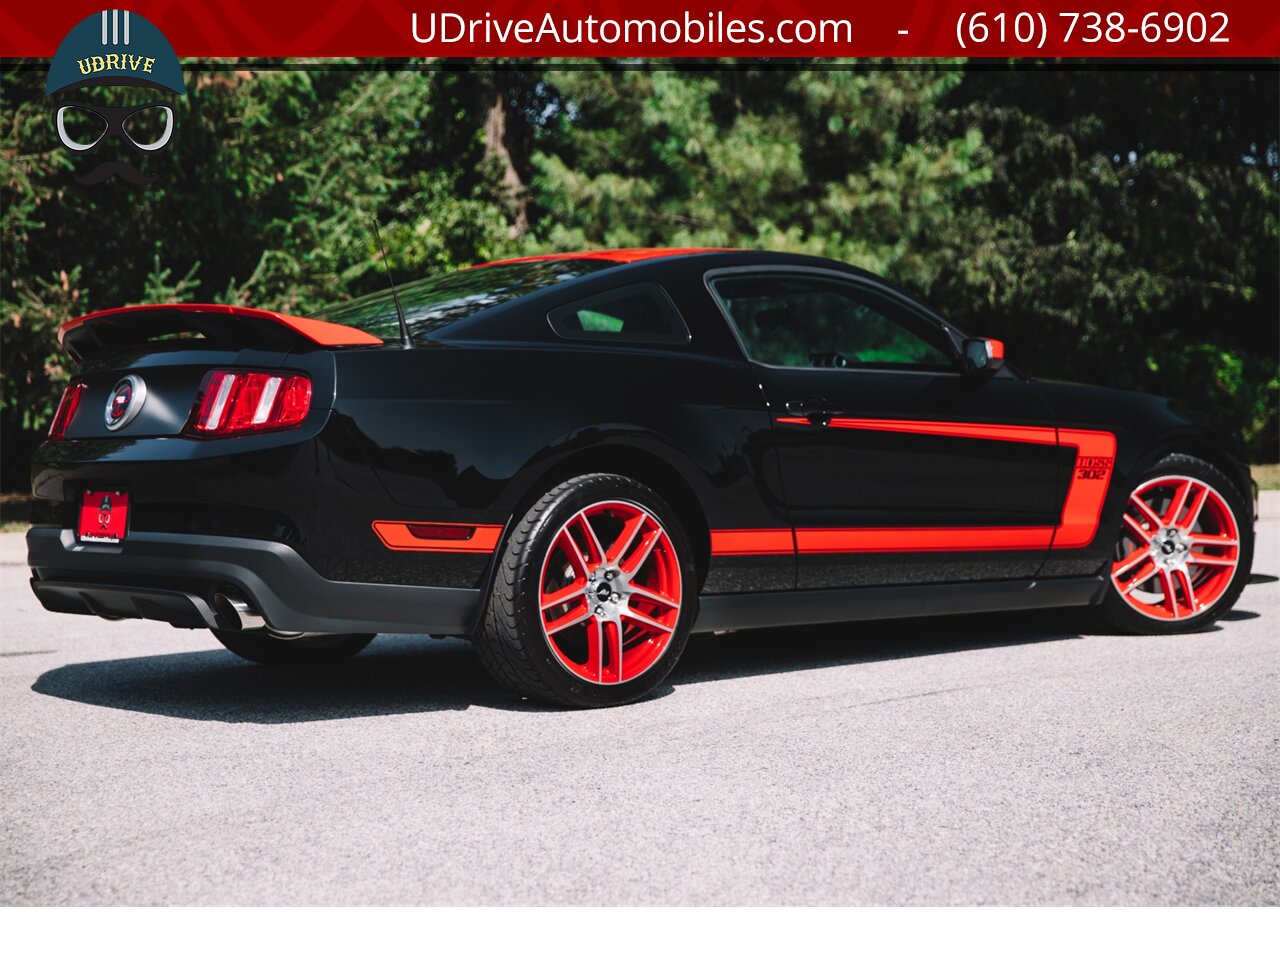 2012 Ford Mustang 866 Miles Boss 302 Laguna Seca #338 of 750  Red TracKey Activated - Photo 4 - West Chester, PA 19382